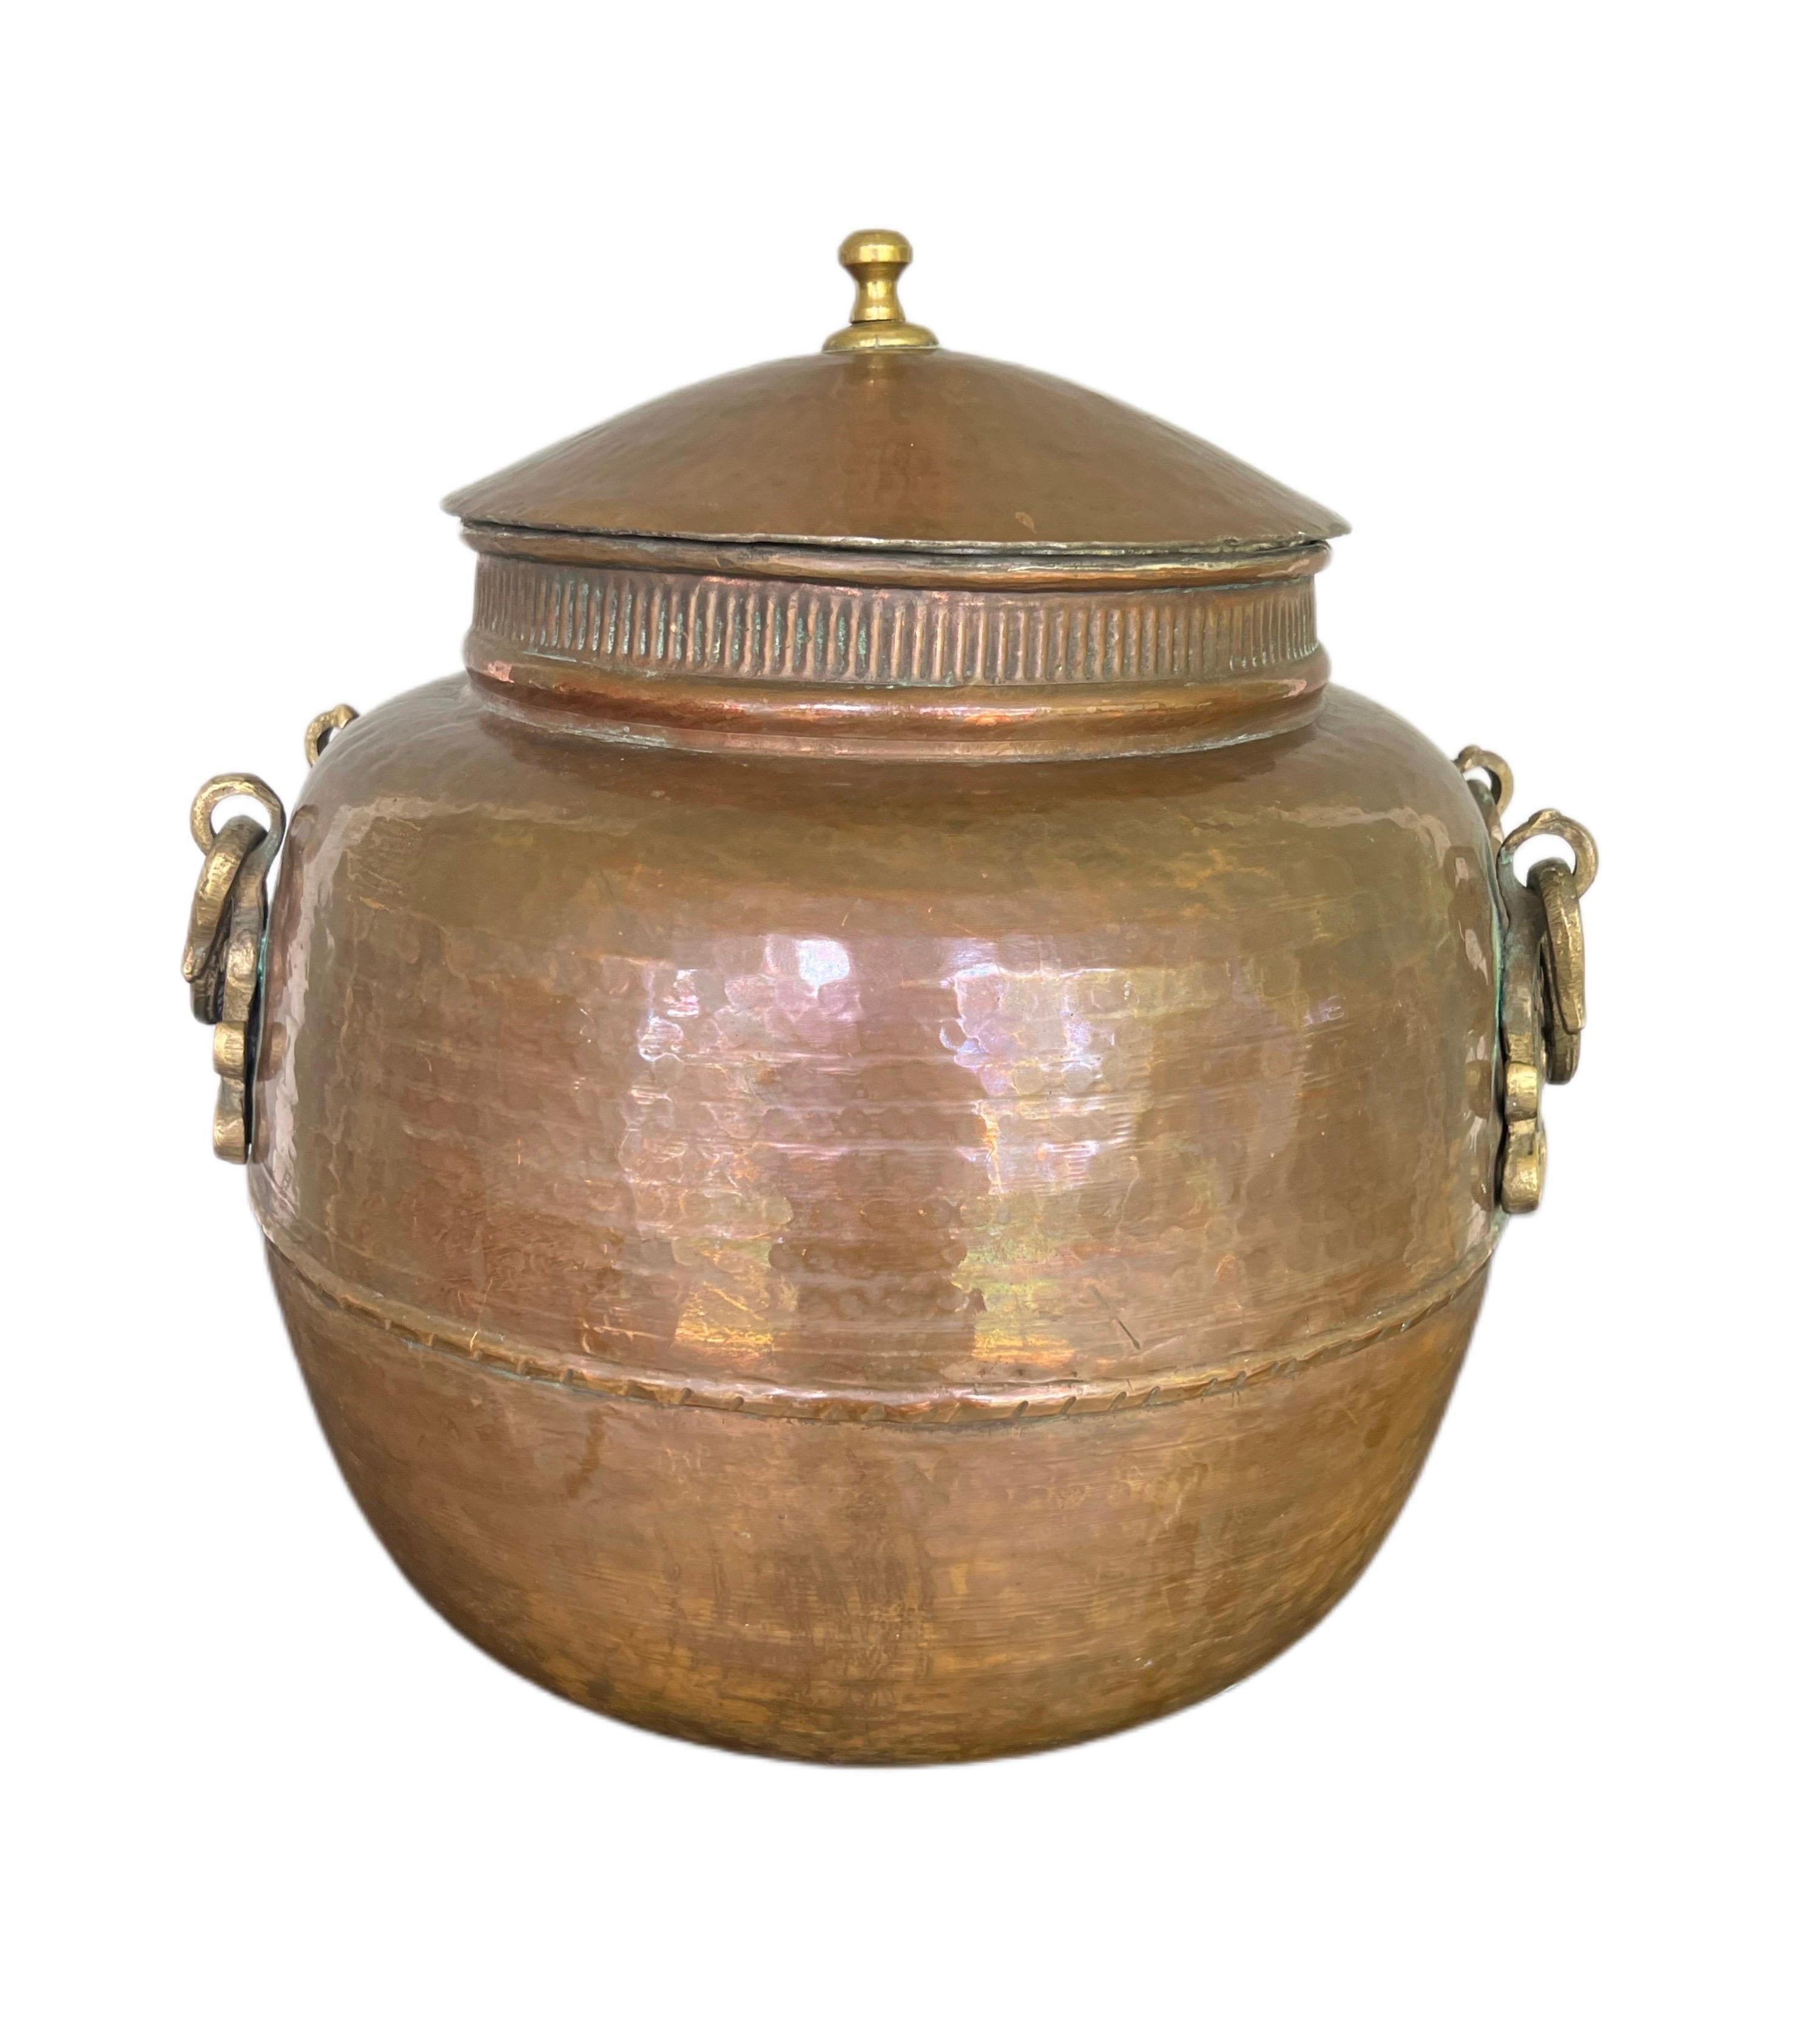 Amazing large antique handmade hammered cauldron/ lidid pot, has heavy ornamental brass handles on each side.  
Beautiful all around, in amazing condition that could be use to store any items of your choice. A very unique decor item for your